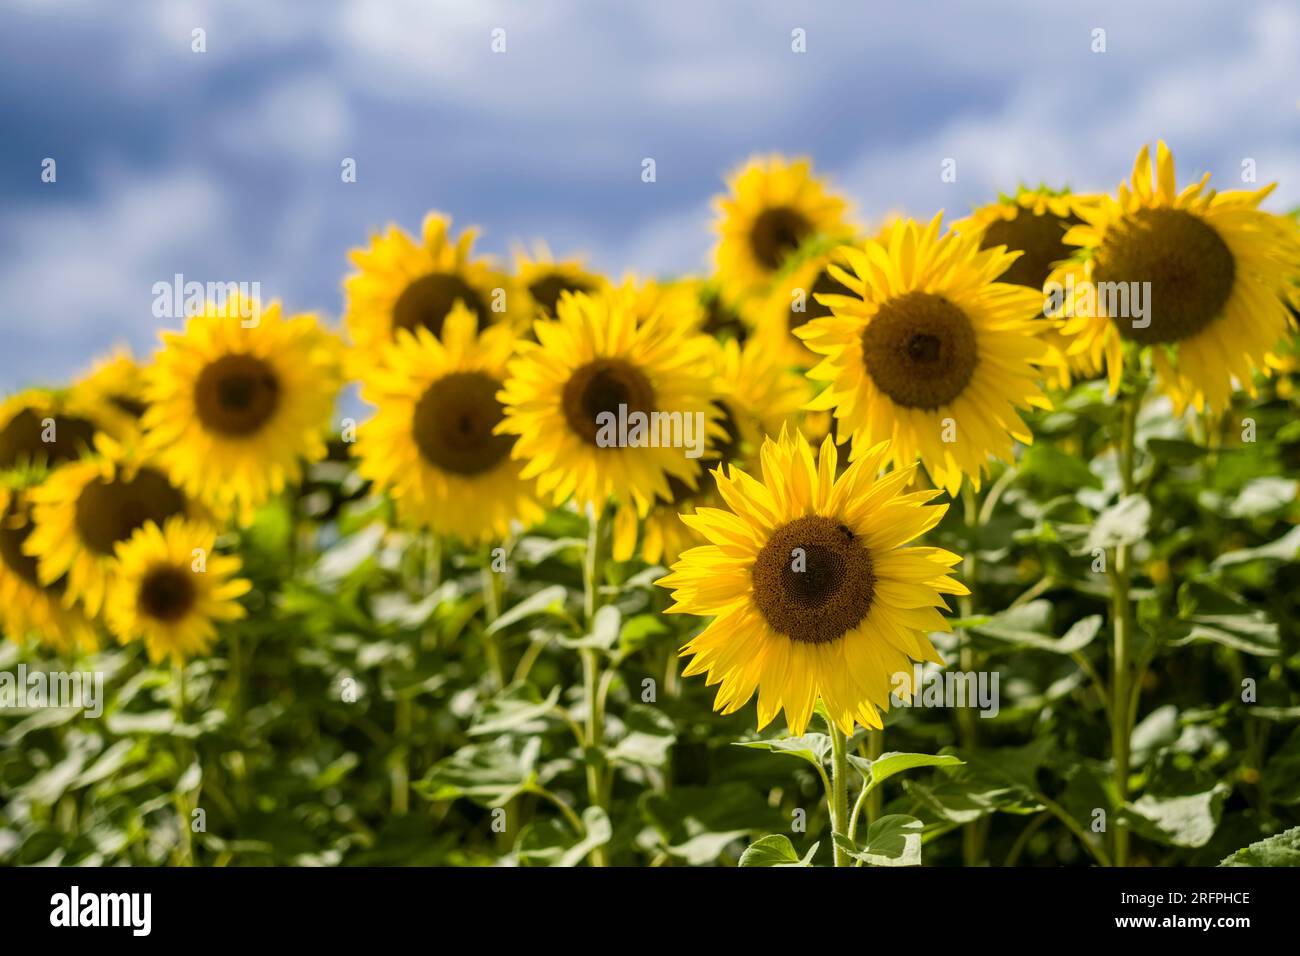 Blossoms of common sunflowers (Helianthus annuus) in a whole sunflower field. Stock Photo